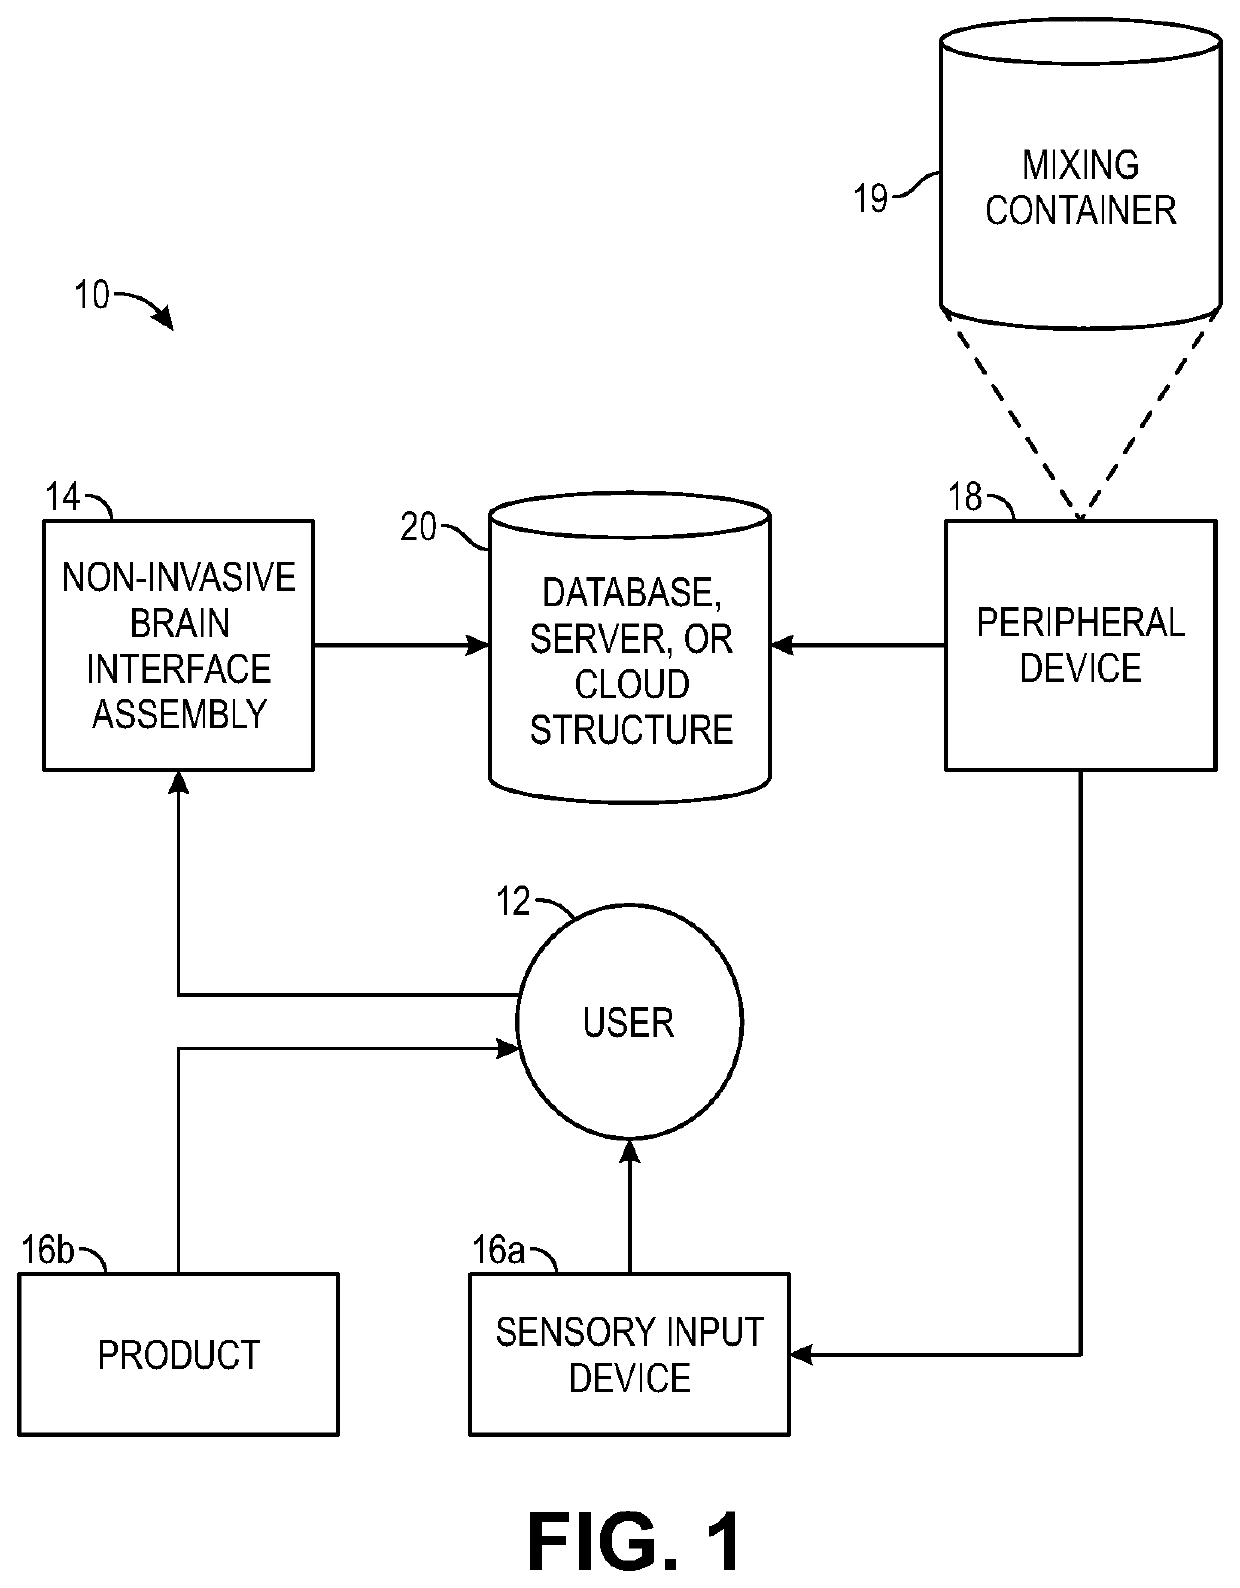 Non-invasive system and method for product formulation assessment based on product-elicited brain state measurements